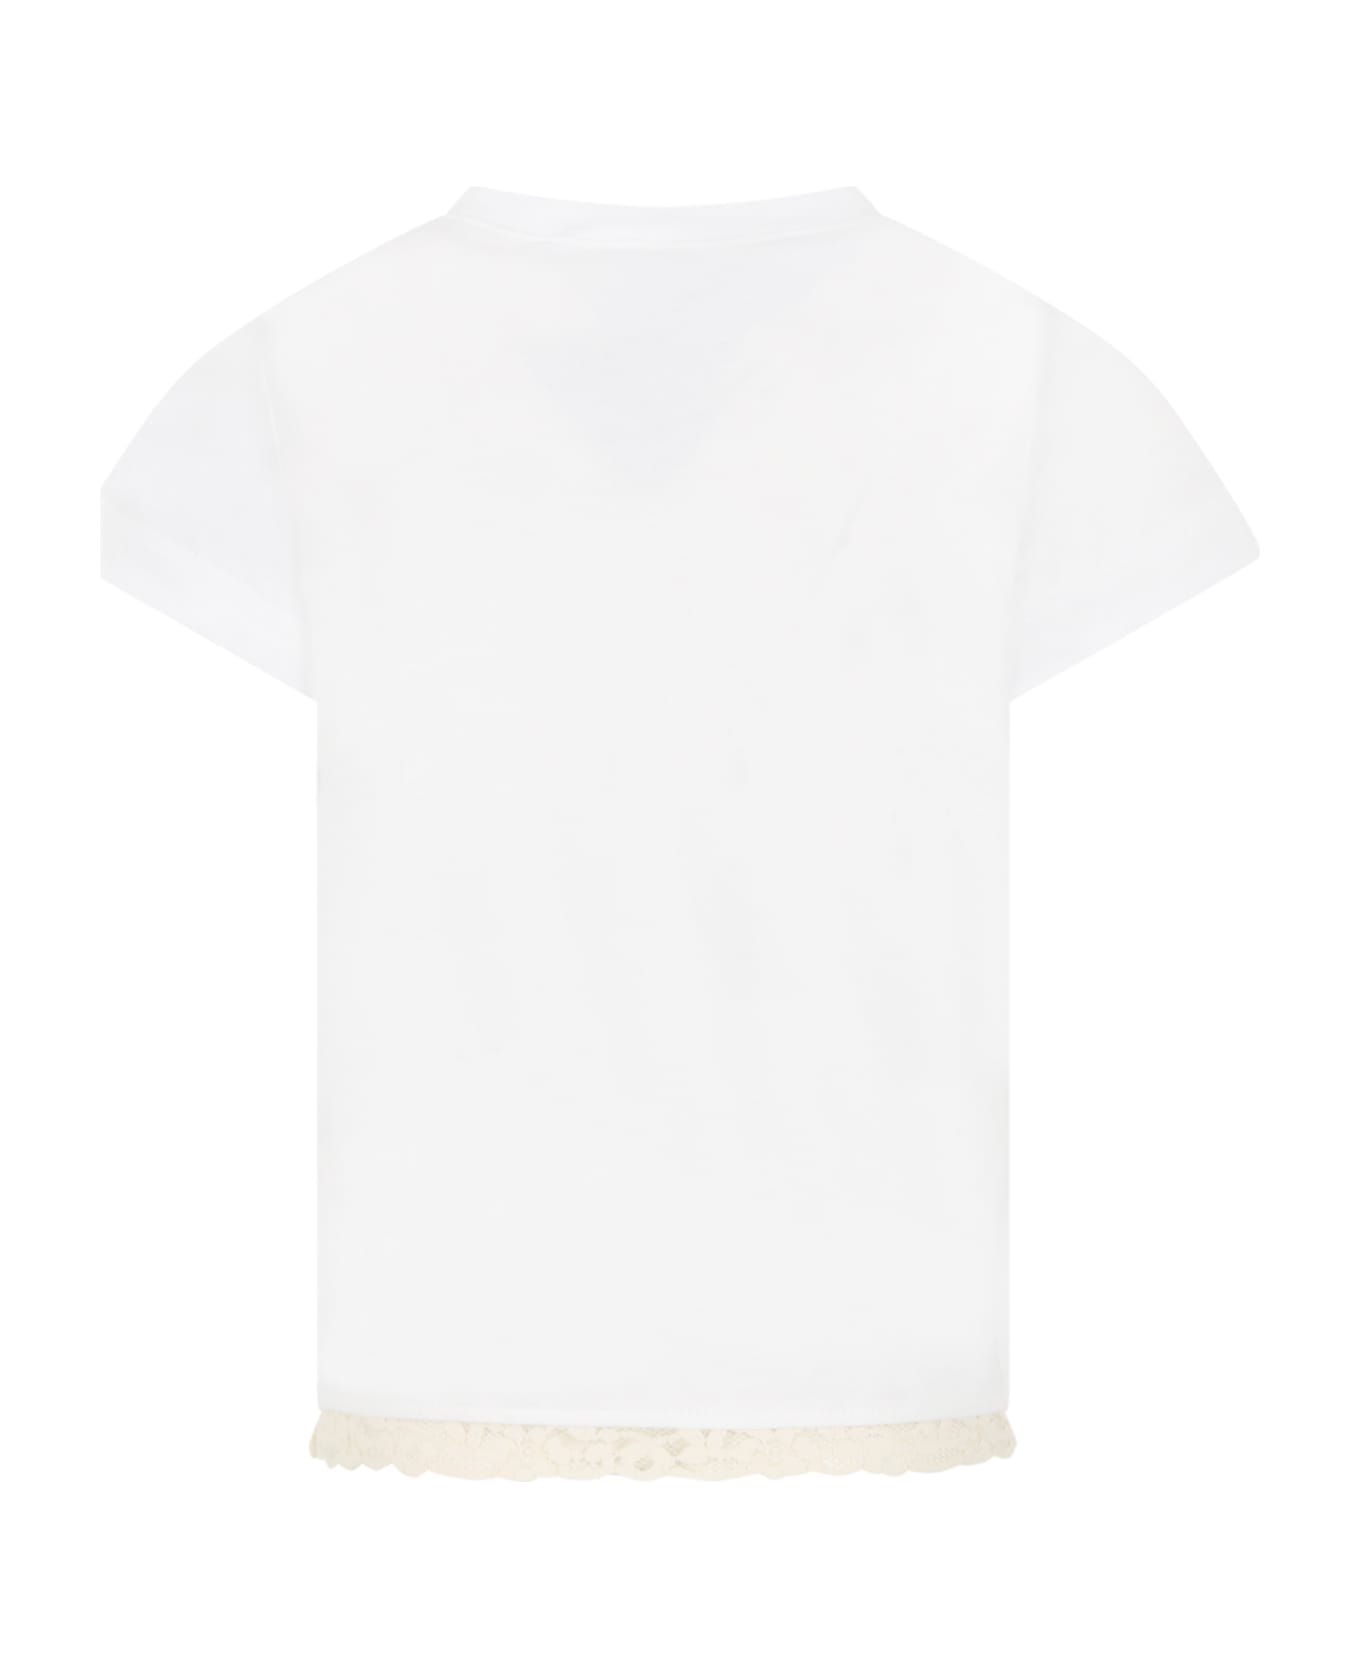 Caffe' d'Orzo White T-shirt For Girl With Lace Details - White